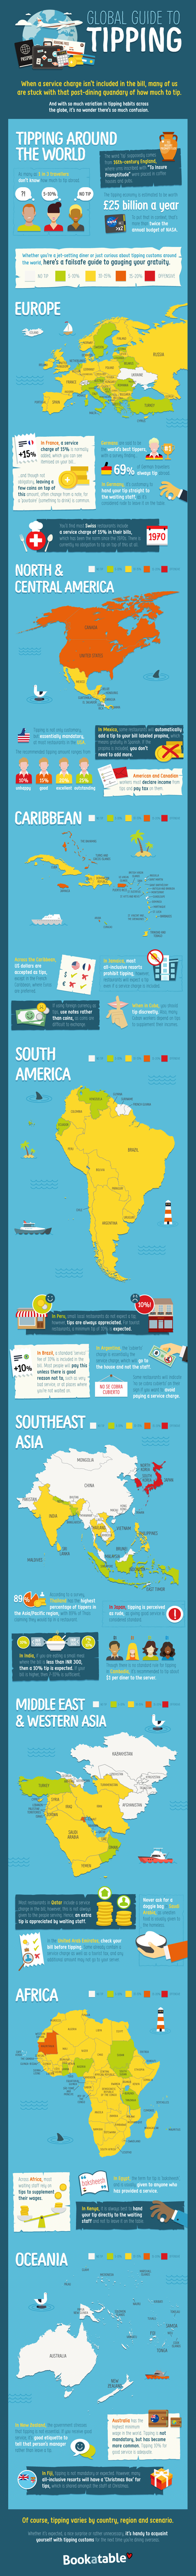 How Much to Tip Around the World - Travel Infographic